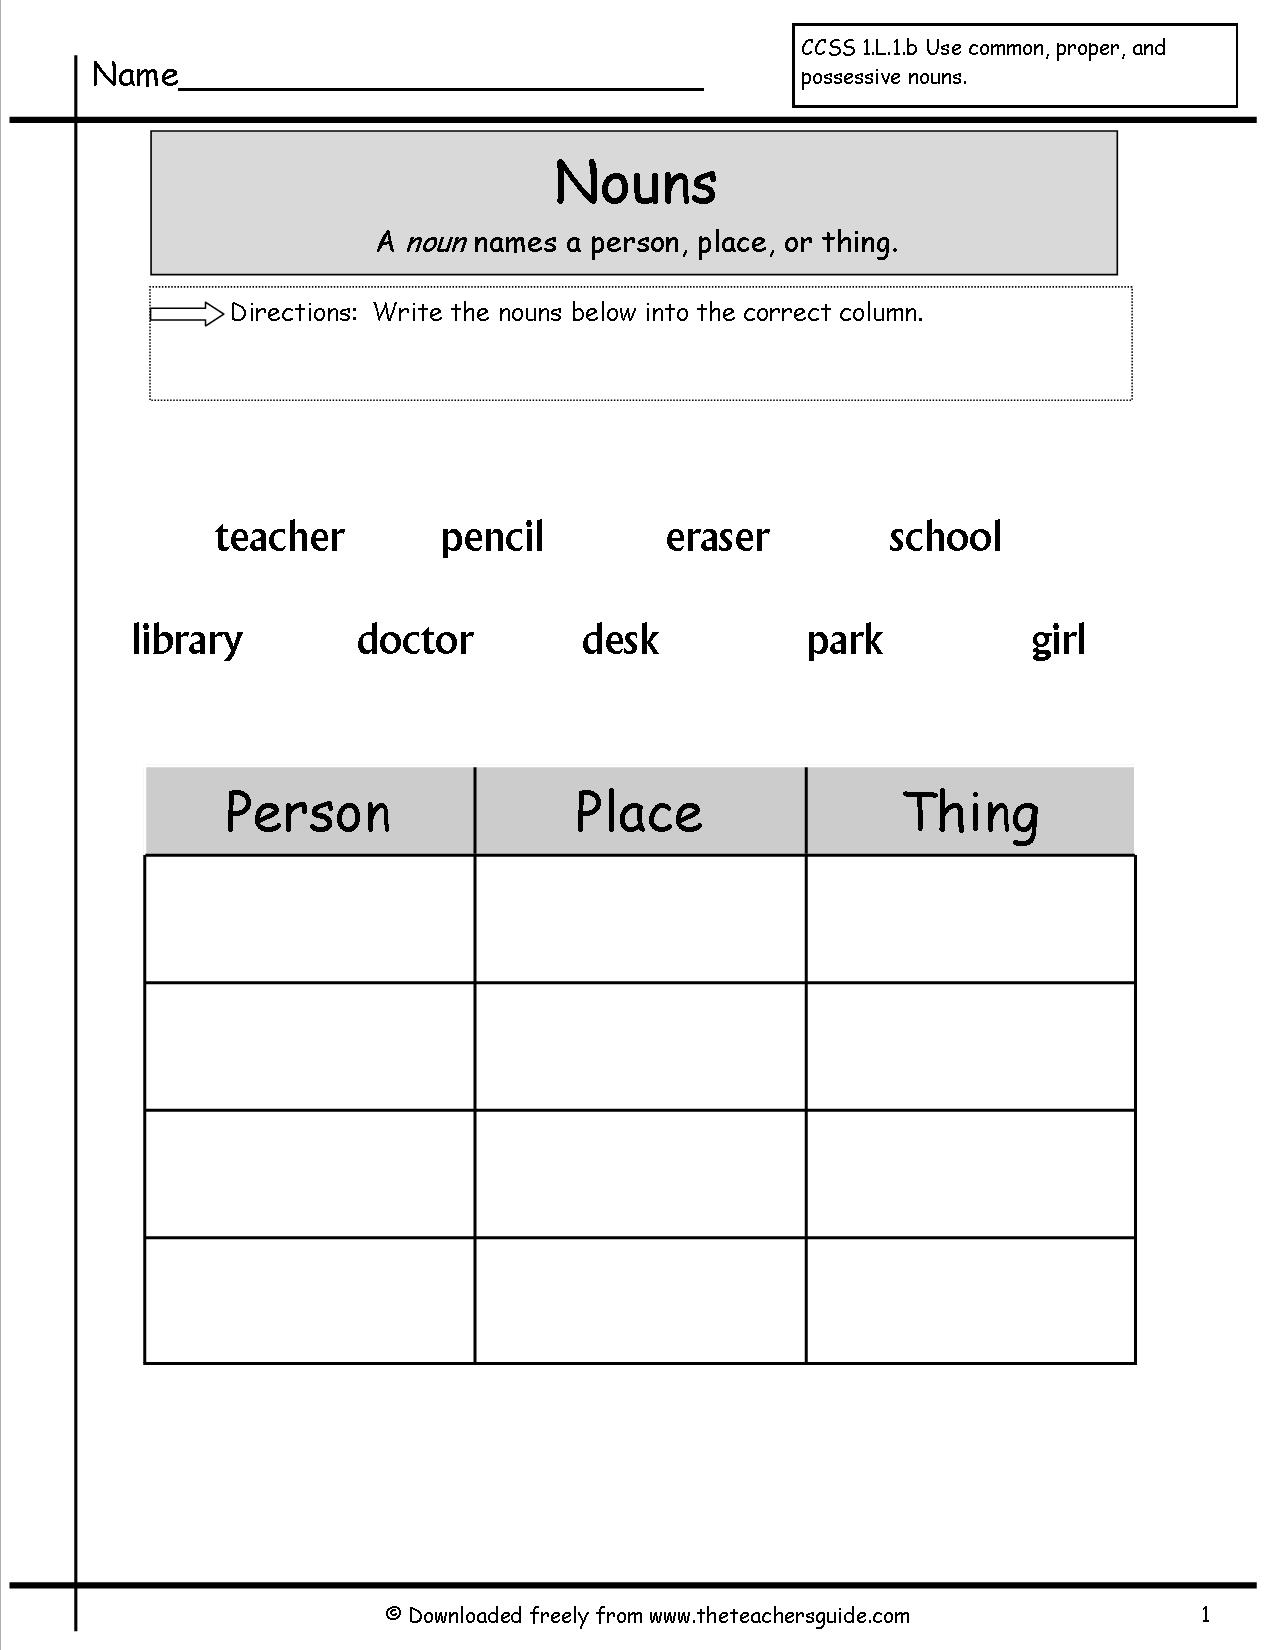 15 Best Images Of Nouns And Verbs Worksheets Sentences Identify Noun And Verb Worksheet